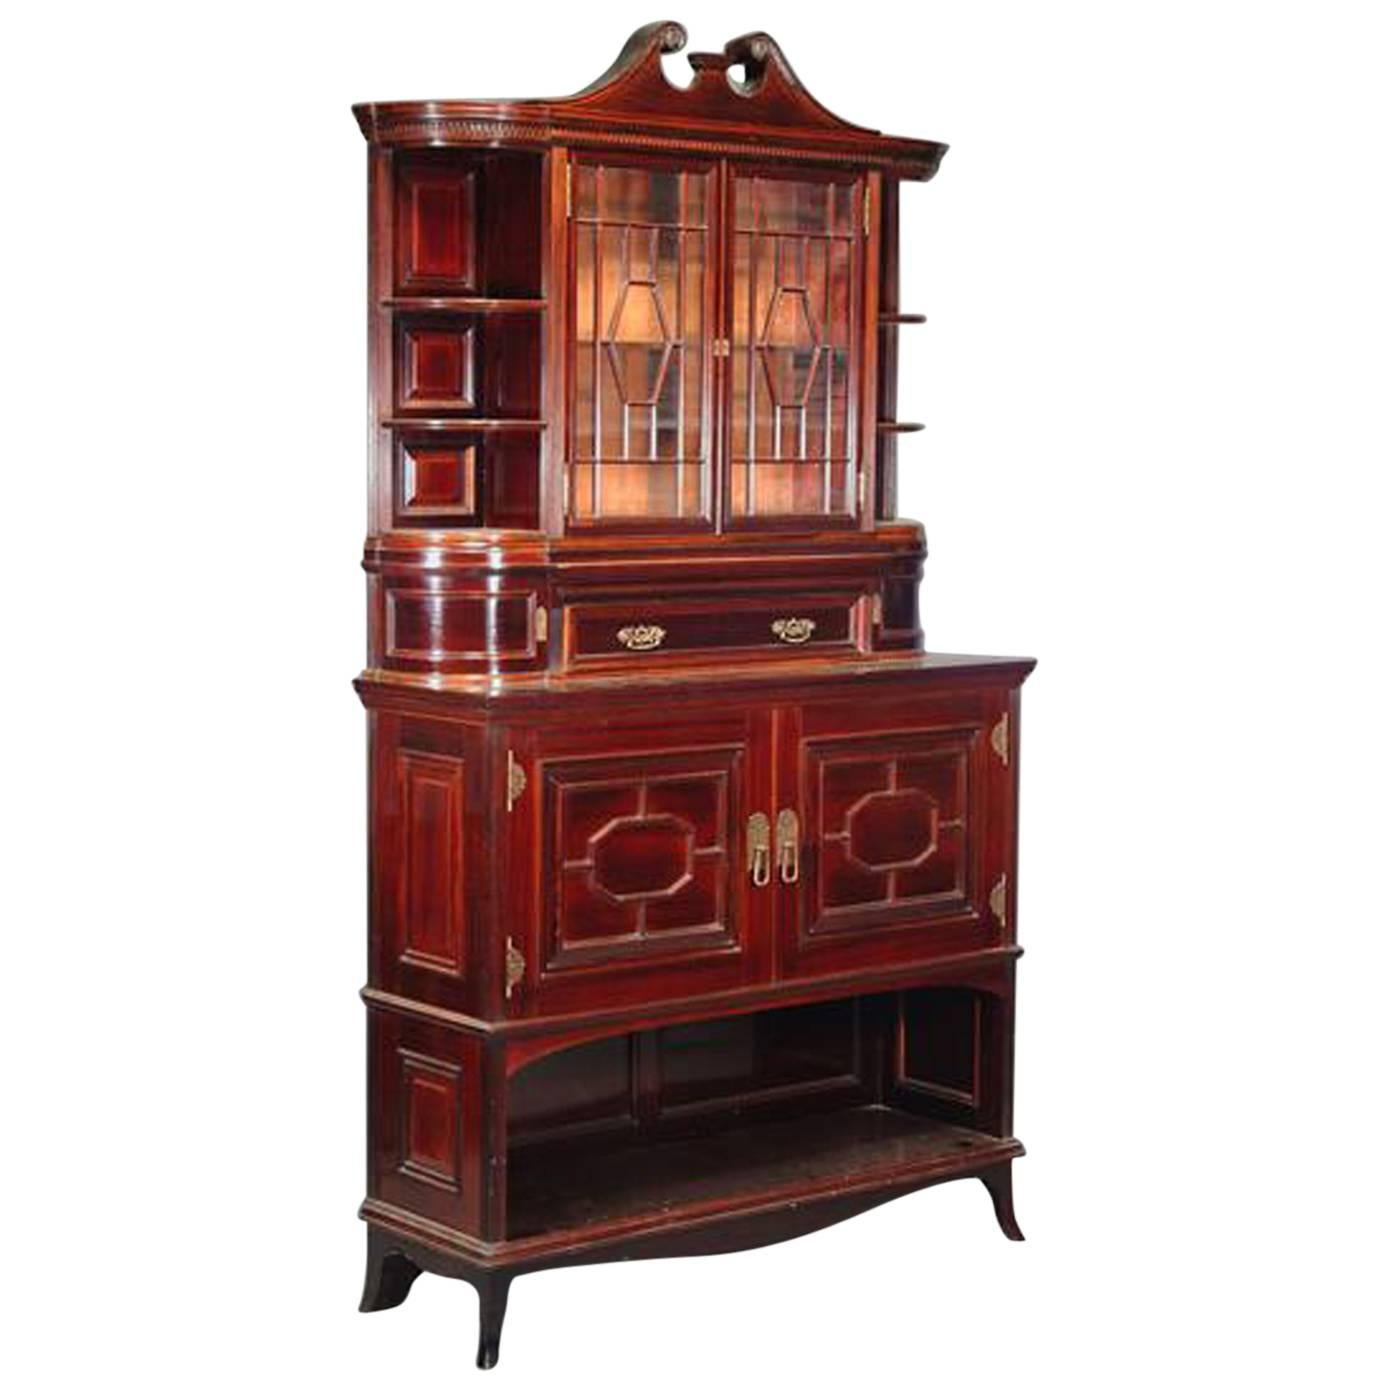 E W Godwin made by Collinson & Lock of London. Eaton Hall Rosewood China Cabinet For Sale